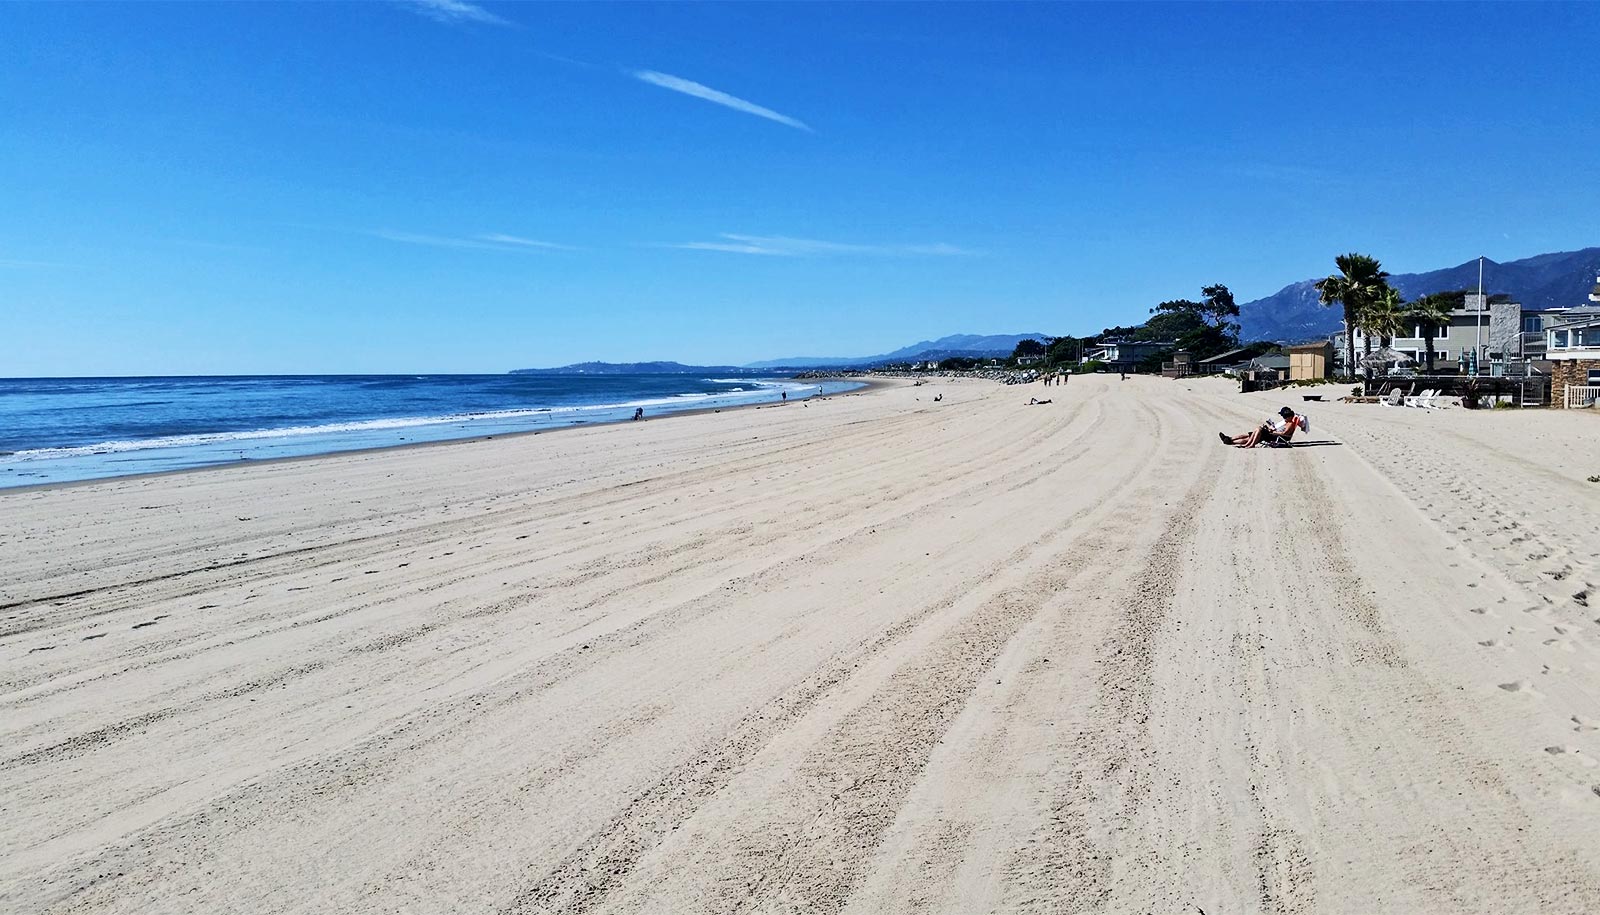 The image shows Carpinteria City Beach, with flat, groomed sands and blue sky.